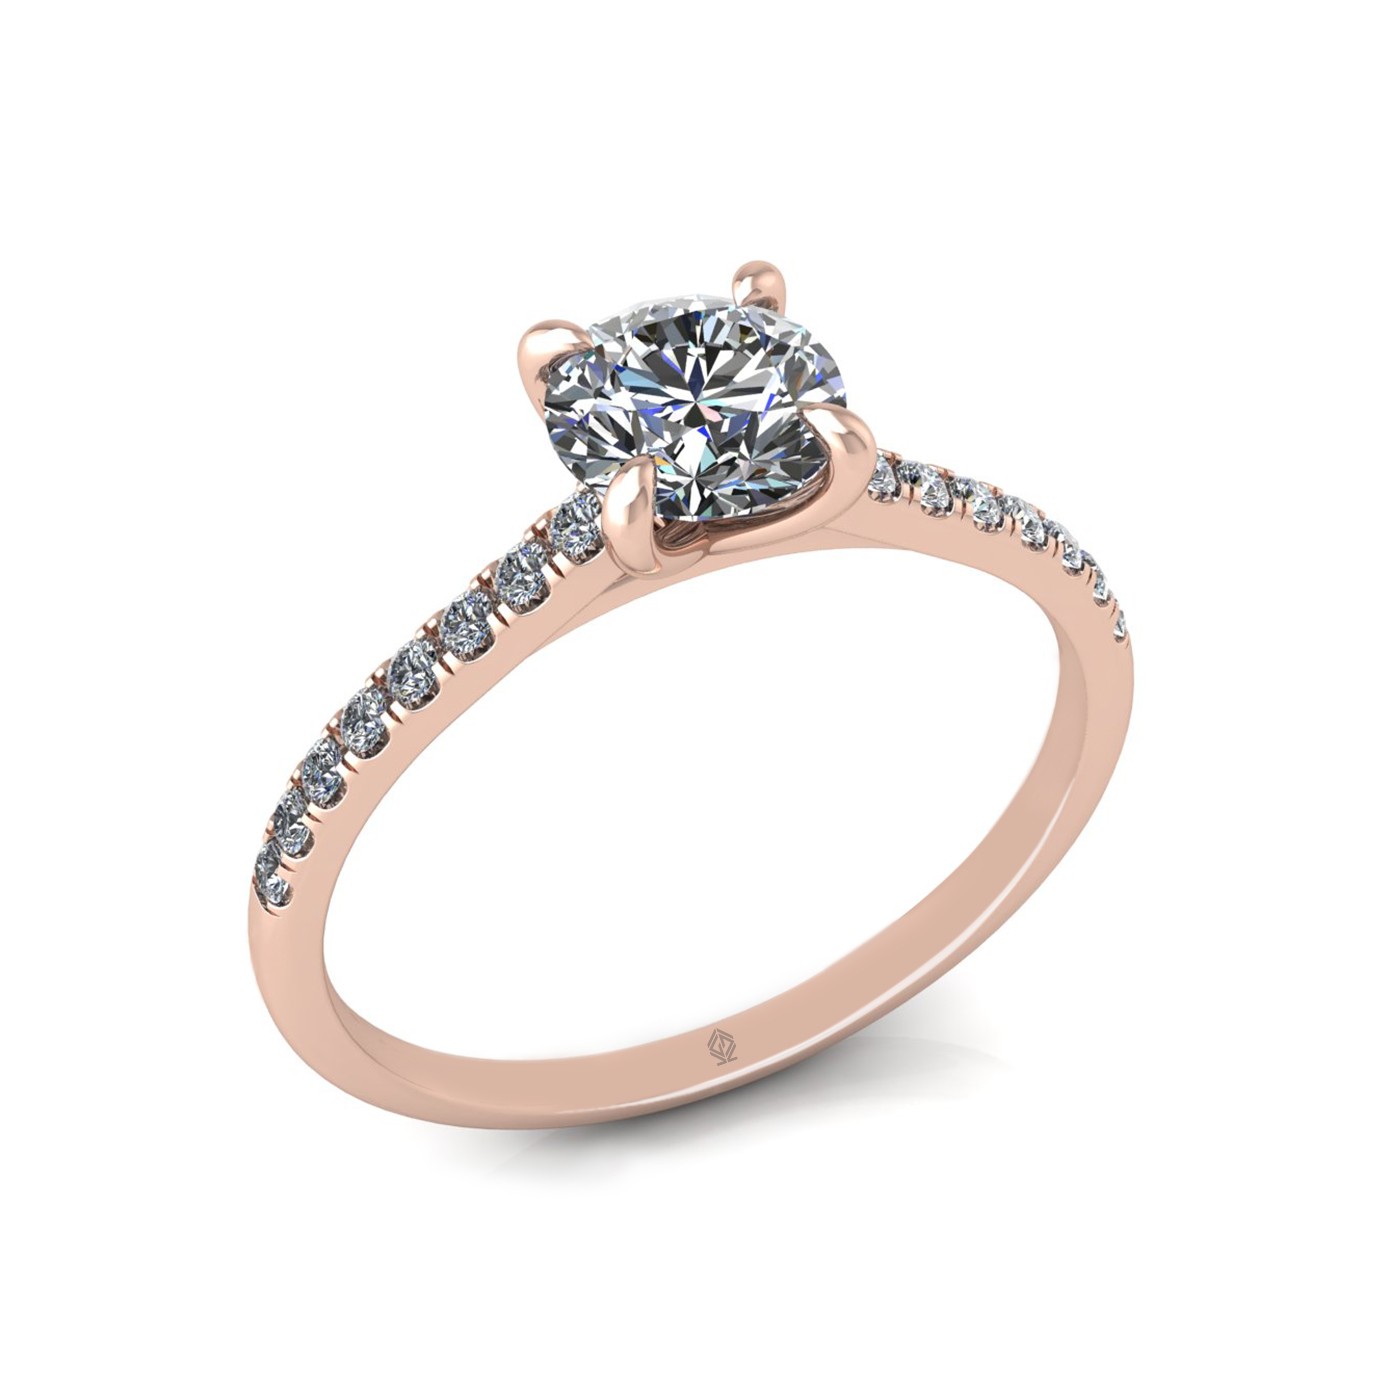 18k rose gold 0,80 ct 4 prongs round cut diamond engagement ring with whisper thin pavÉ set band